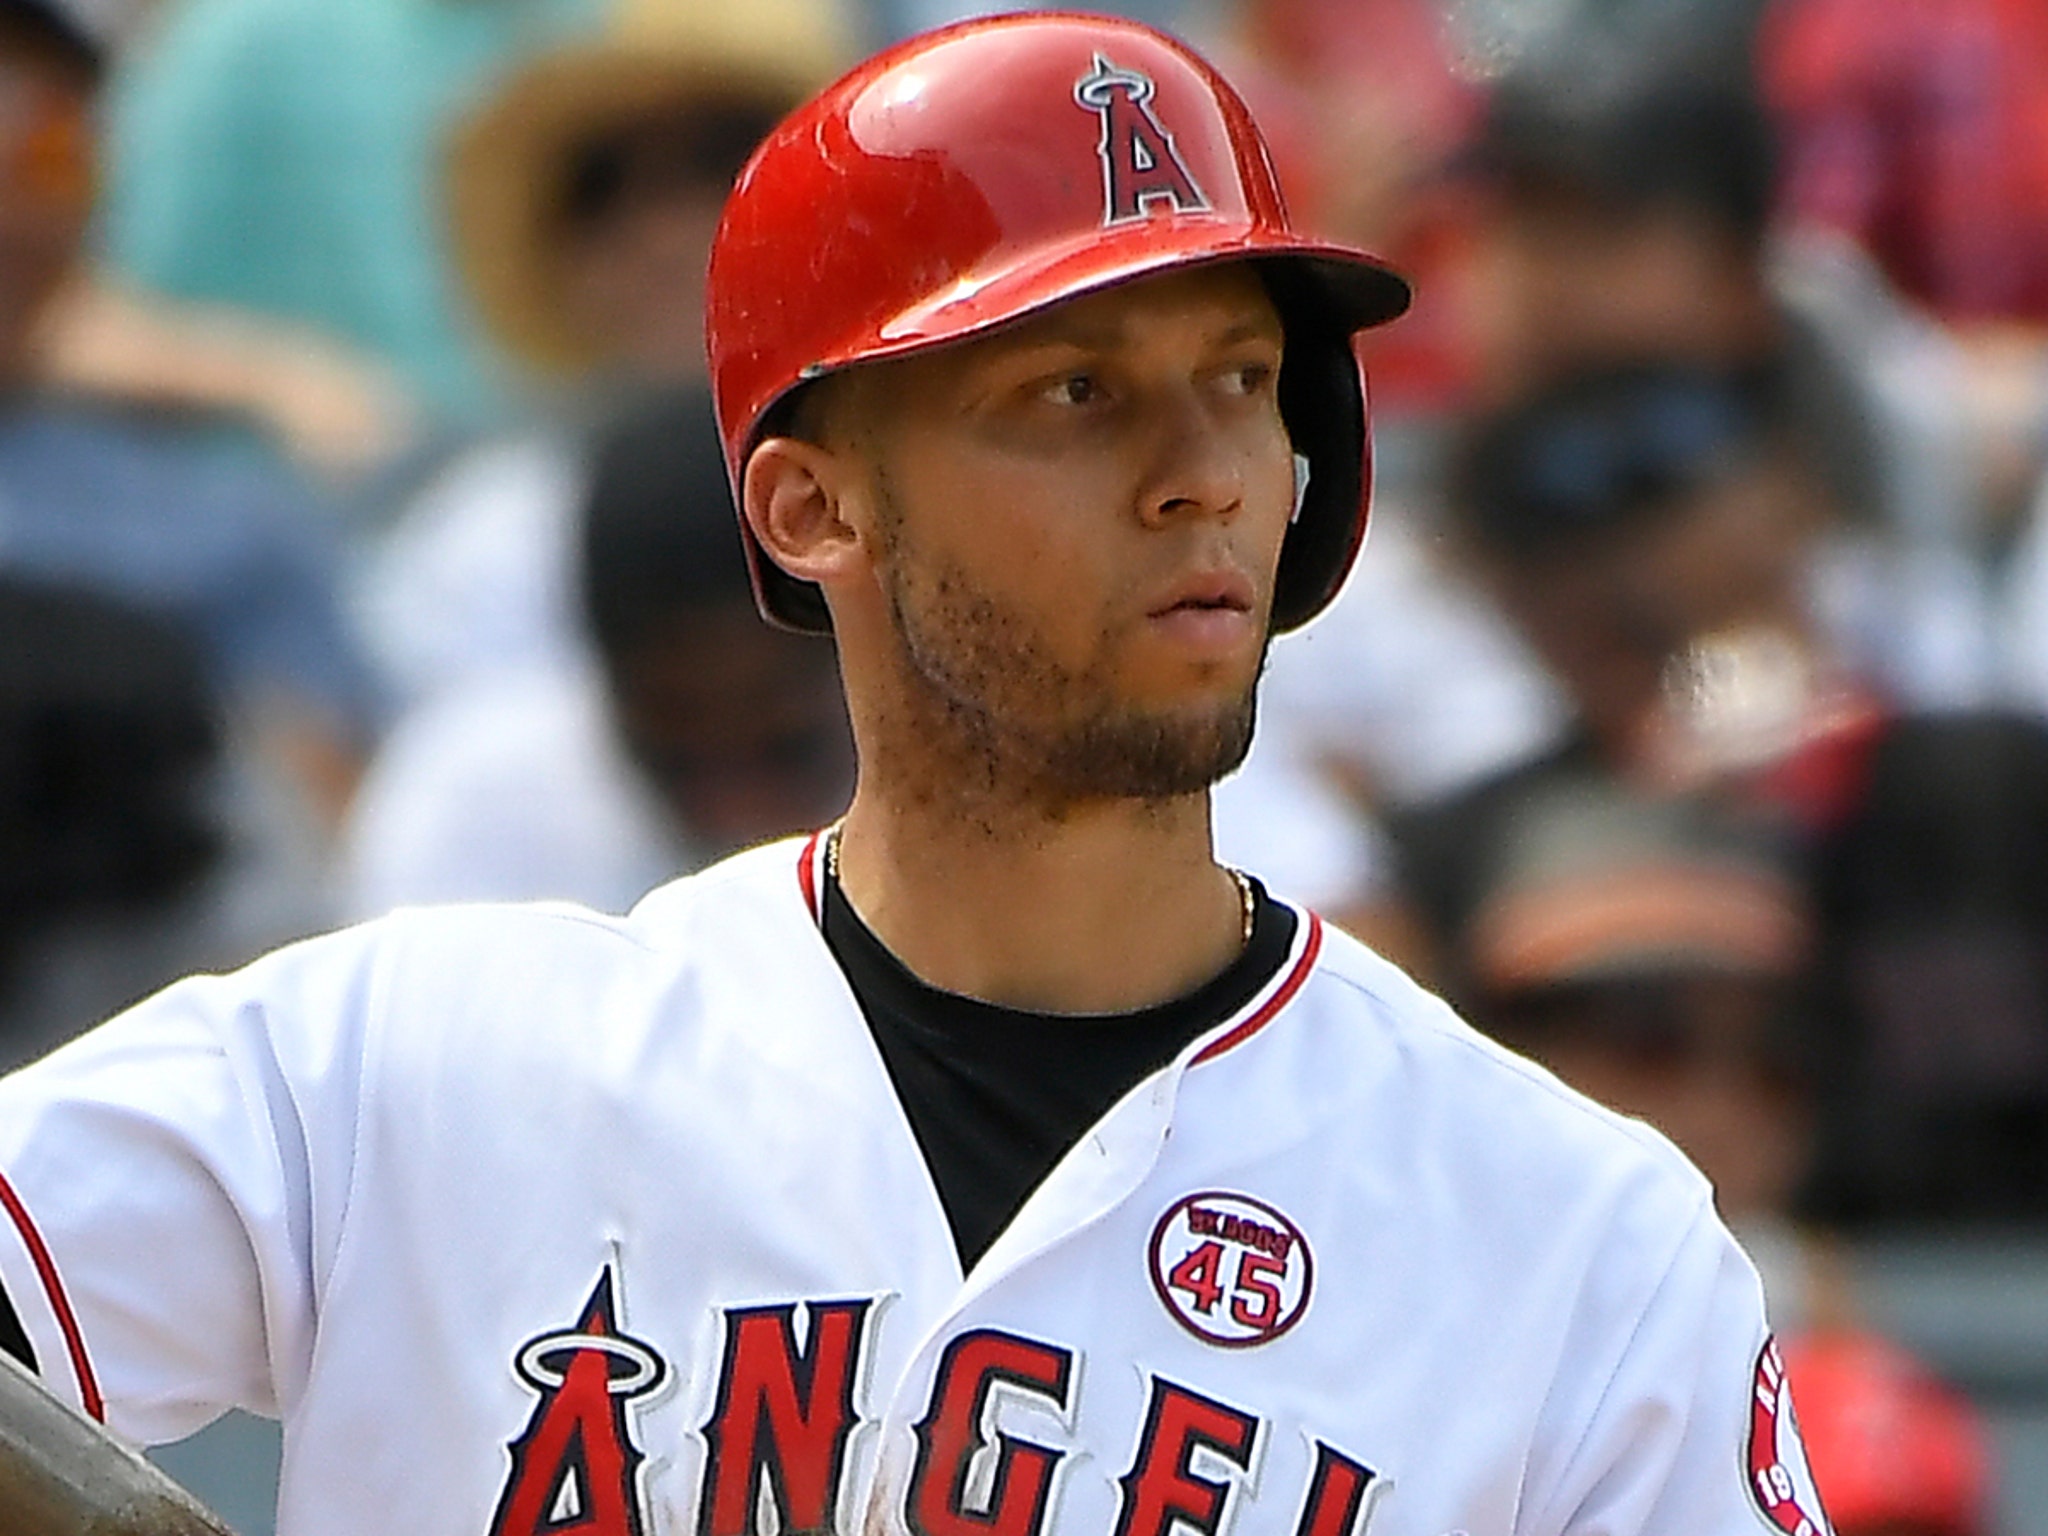 Angels news: Andrelton Simmons reveals battle with depression